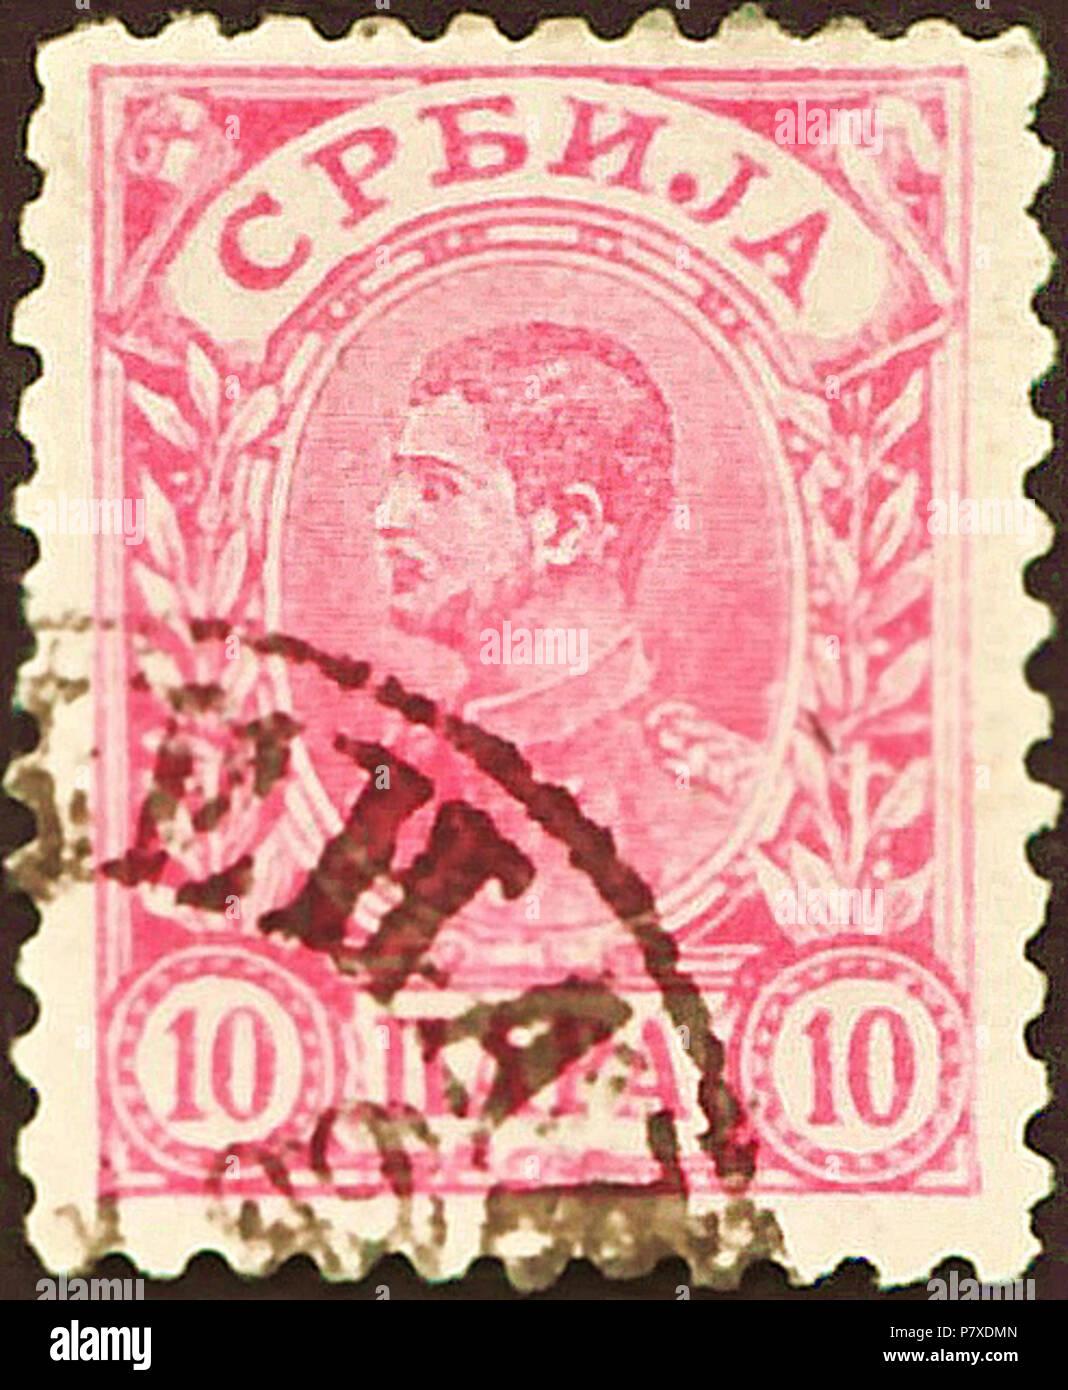 Stamp of the Kingdom of Serbia; 1894; definitive stamp of the issue 'King Alexander I'; type 'B' = perforation 11½ (K or L); postmarked Stamp: Michel: No. 36B; Yvert & Tellier: No. 42B; Scott: No. 41 Color: rose to carmine rose on granite paper Watermark: none Nominal value: 10 Para Postage validity: from 5 November 1894 until 1903 Stamp picture size (printed area): 16.5 x 21.5 mm . 5 November 1894 (first issue day of the stamp) 352 SRB 1894 MiNr036B pm B002a Stock Photo